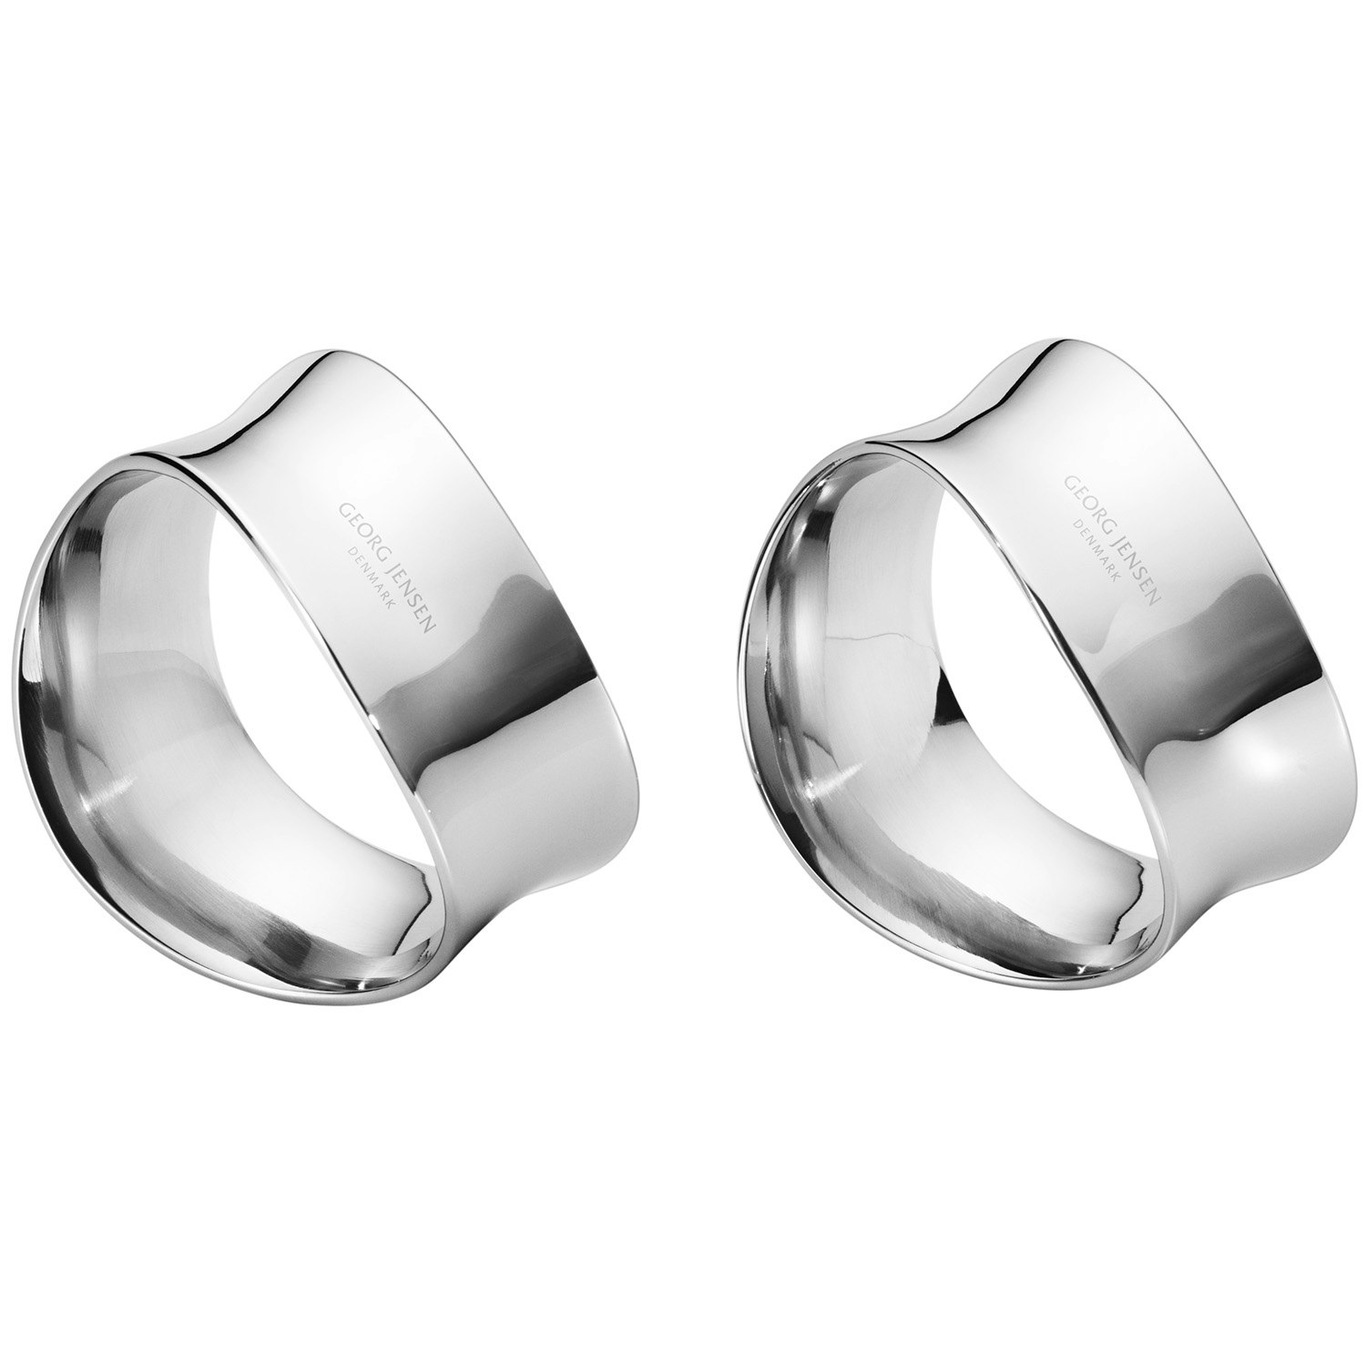 Brushed Stainless Steel Napkin Ring